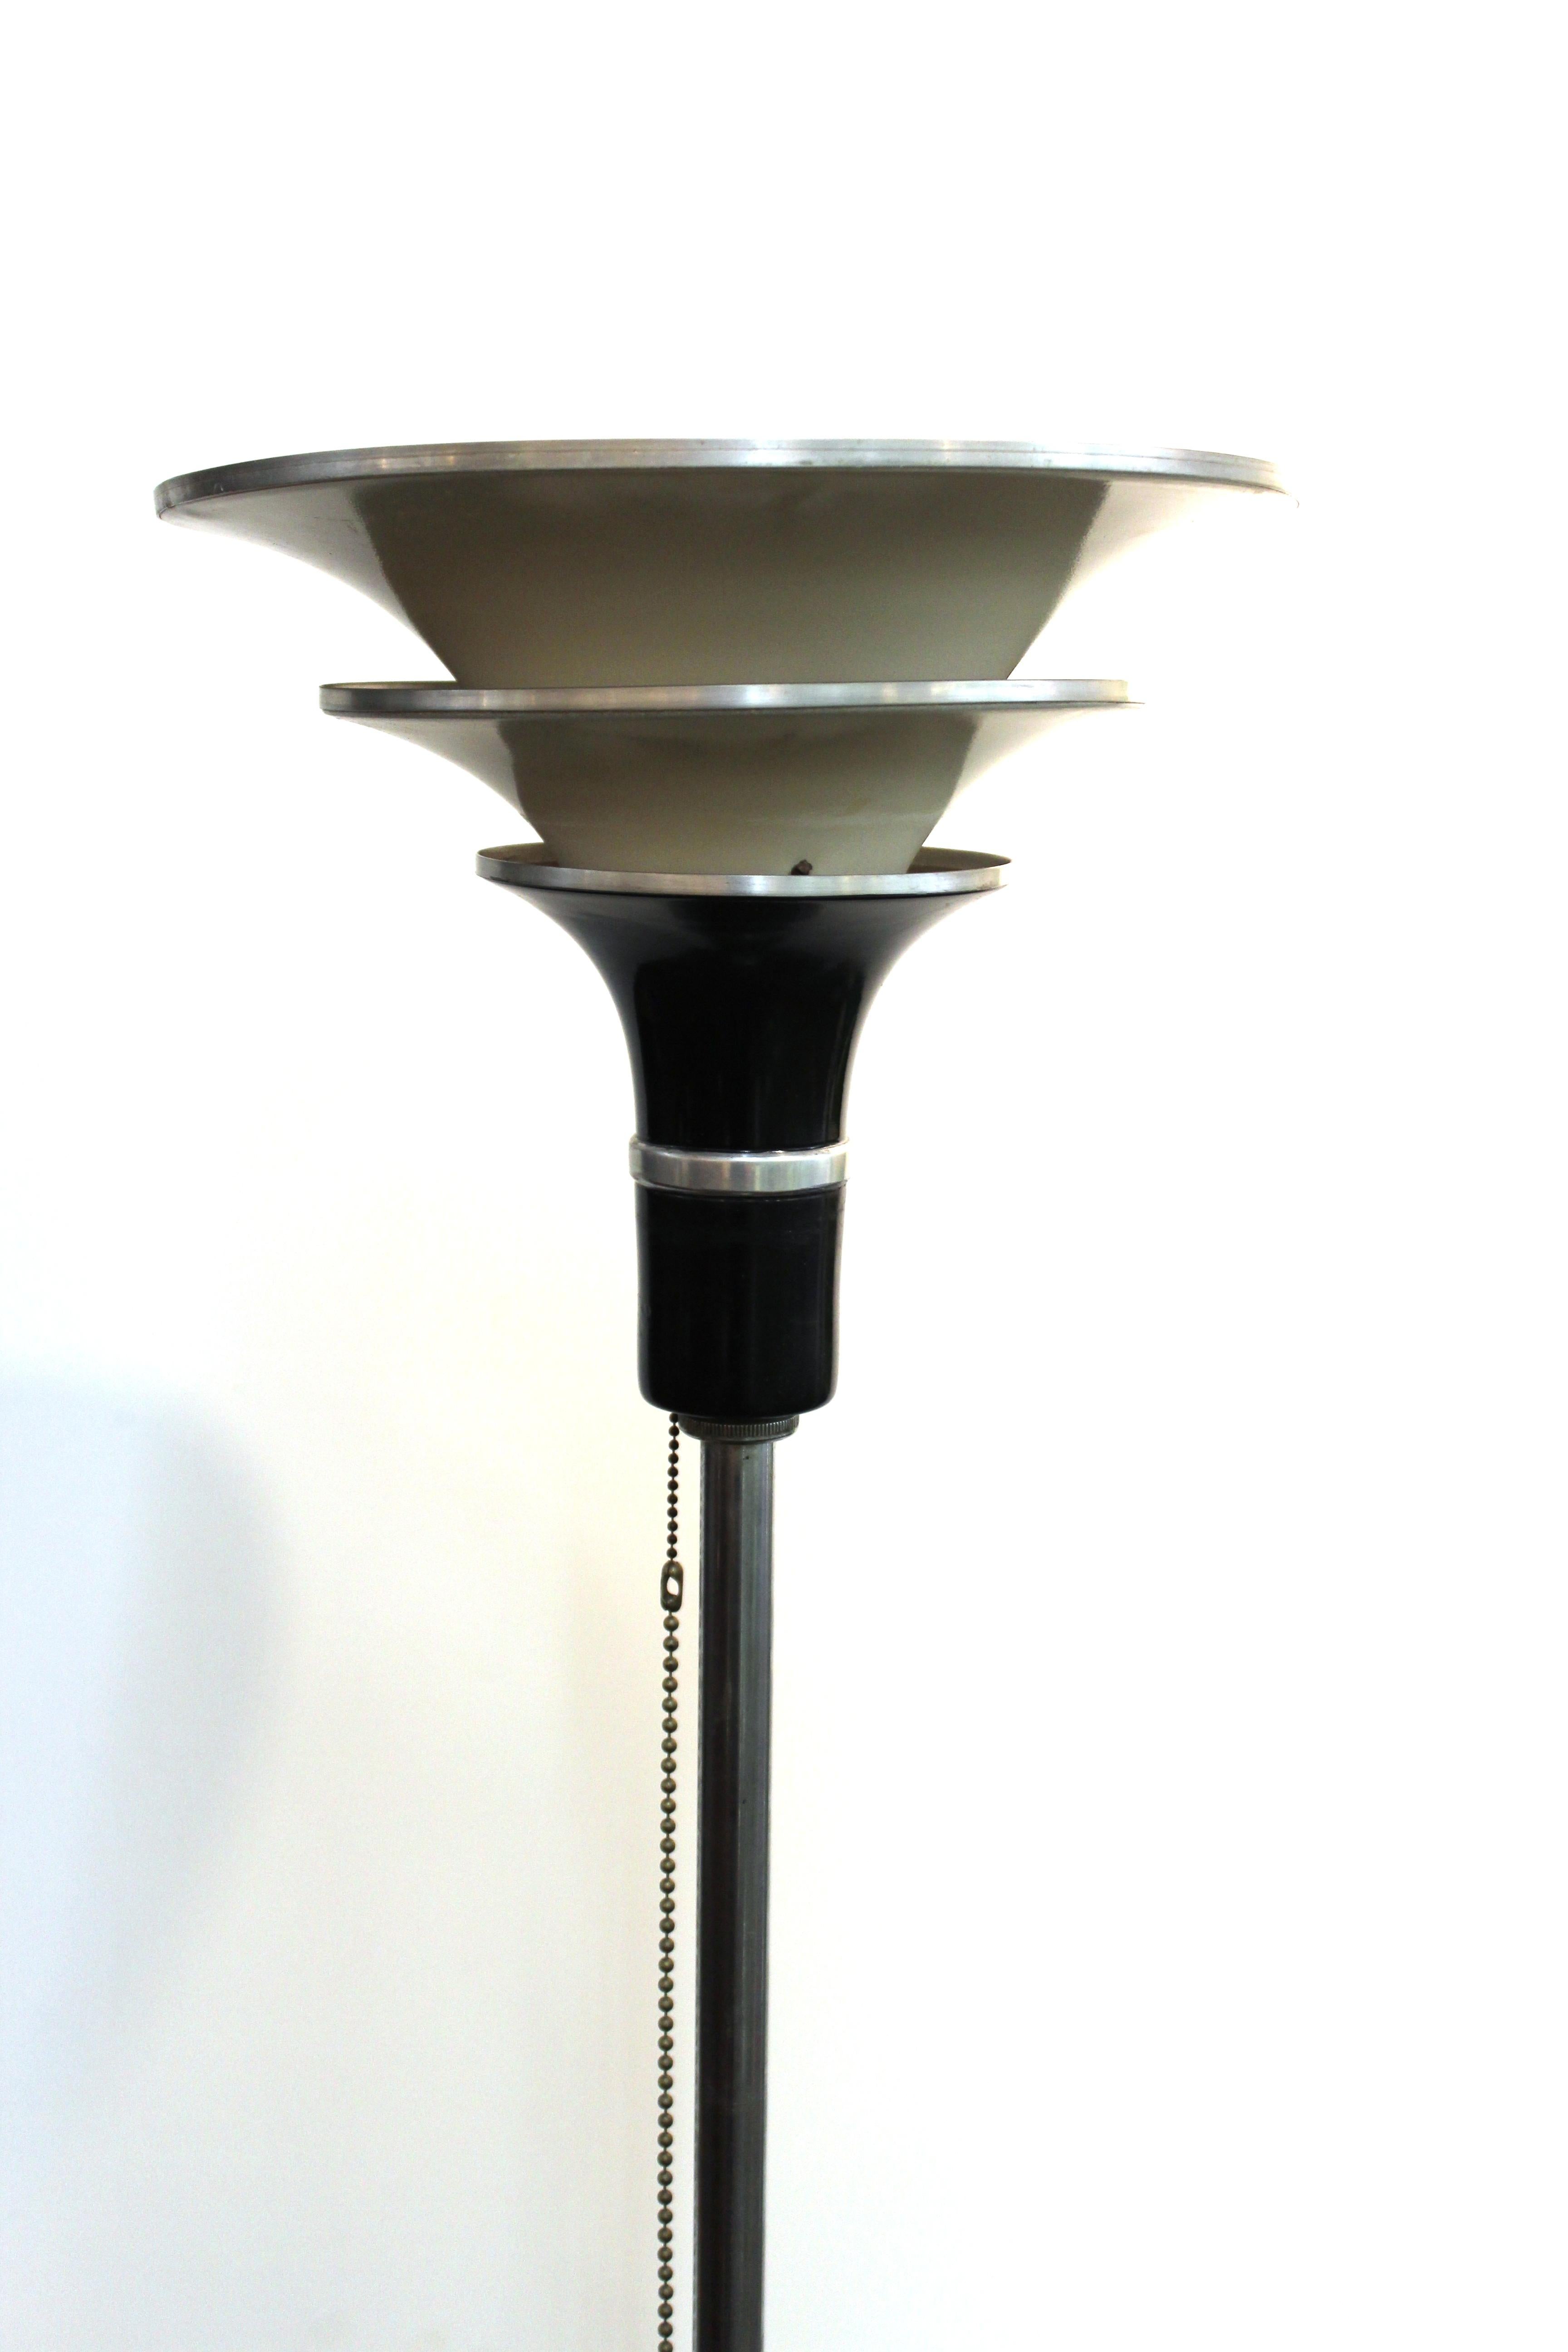 American Art Deco torchiere floor lamp with three-tiered metal shade in streamlined style. The piece was likely manufactured in the United States and is in great vintage condition with age-appropriate wear.